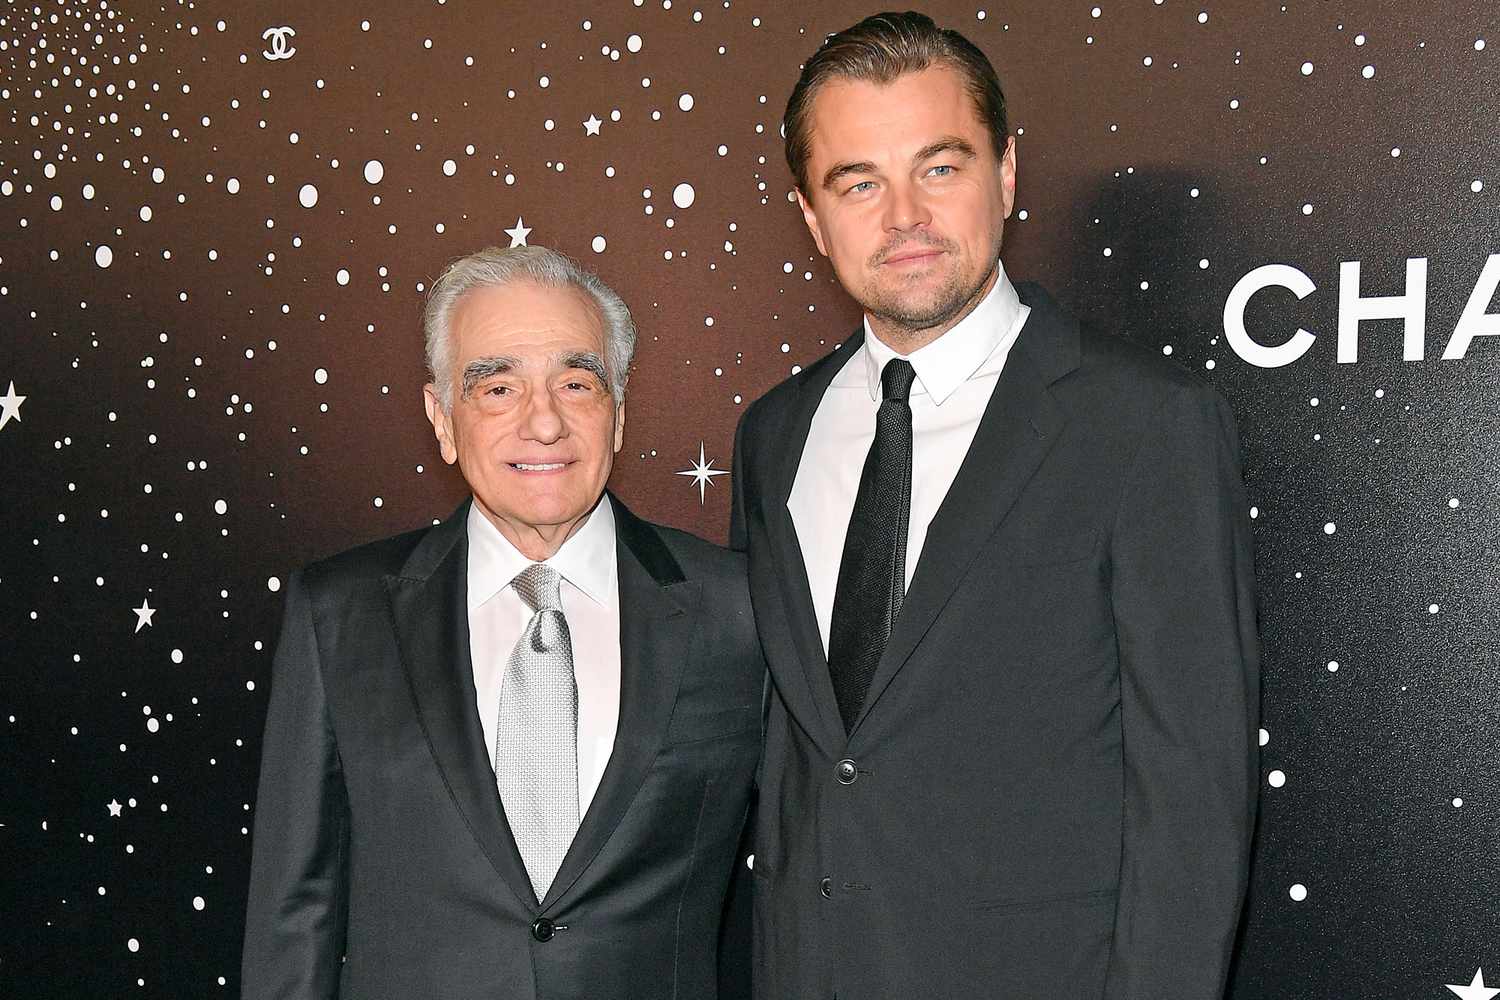 NEW YORK, NEW YORK - NOVEMBER 19: Martin Scorsese (L) and Leonardo DiCaprio attend the 2018 Museum of Modern Art Film Benefit: A Tribute To Martin Scorsese at Museum of Modern Art on November 19, 2018 in New York City. (Photo by Dia Dipasupil/WireImage)